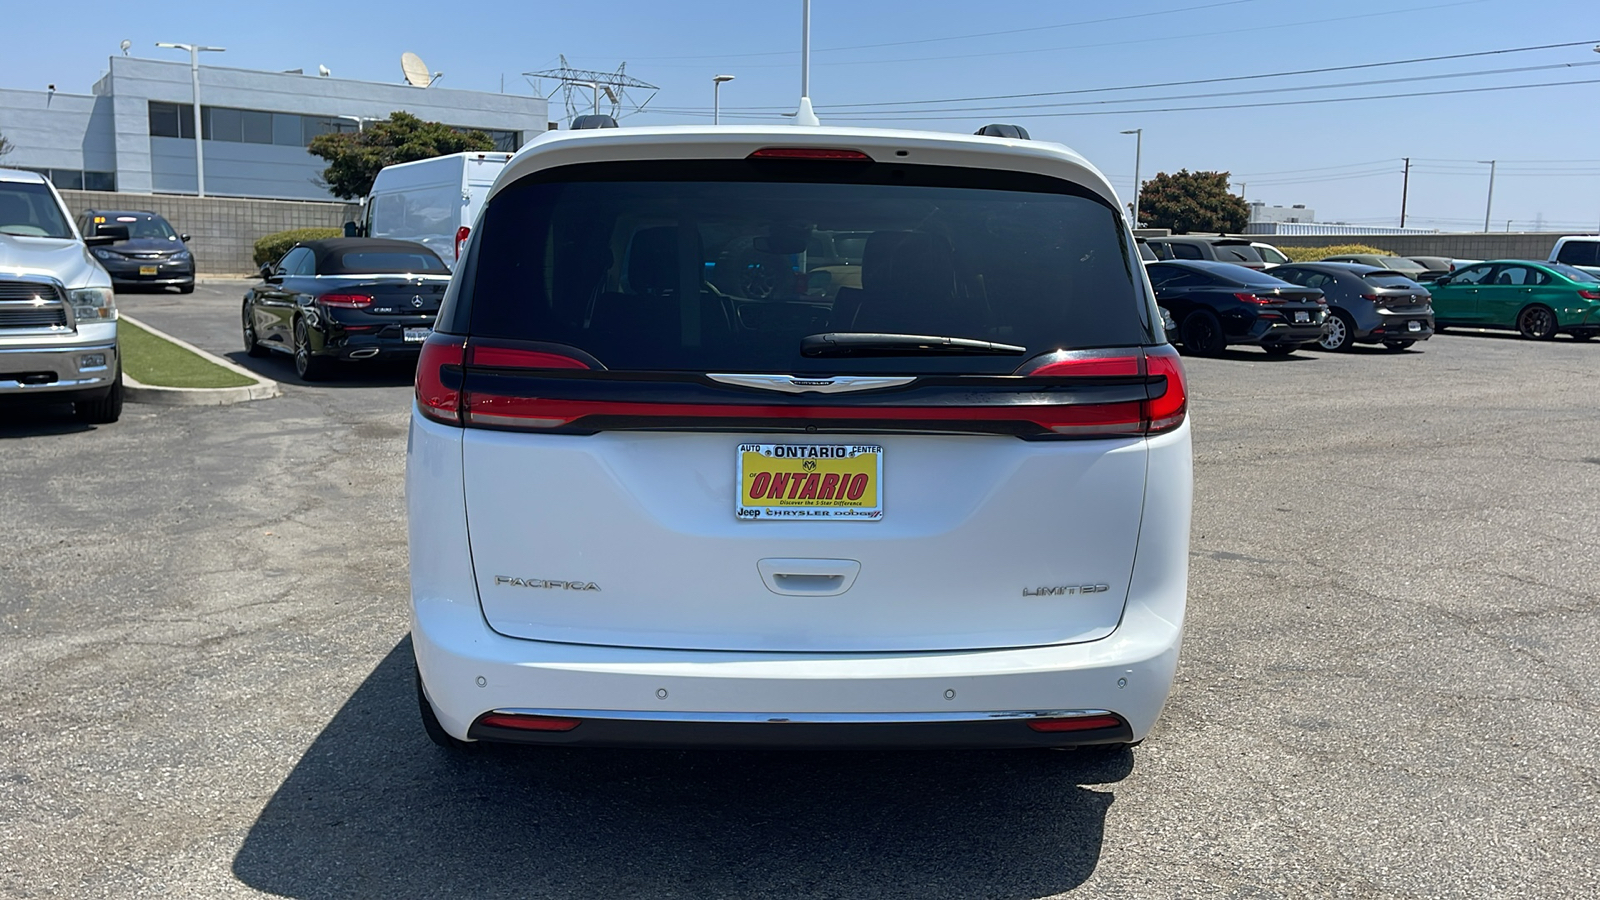 2022 Chrysler Pacifica Limited 4